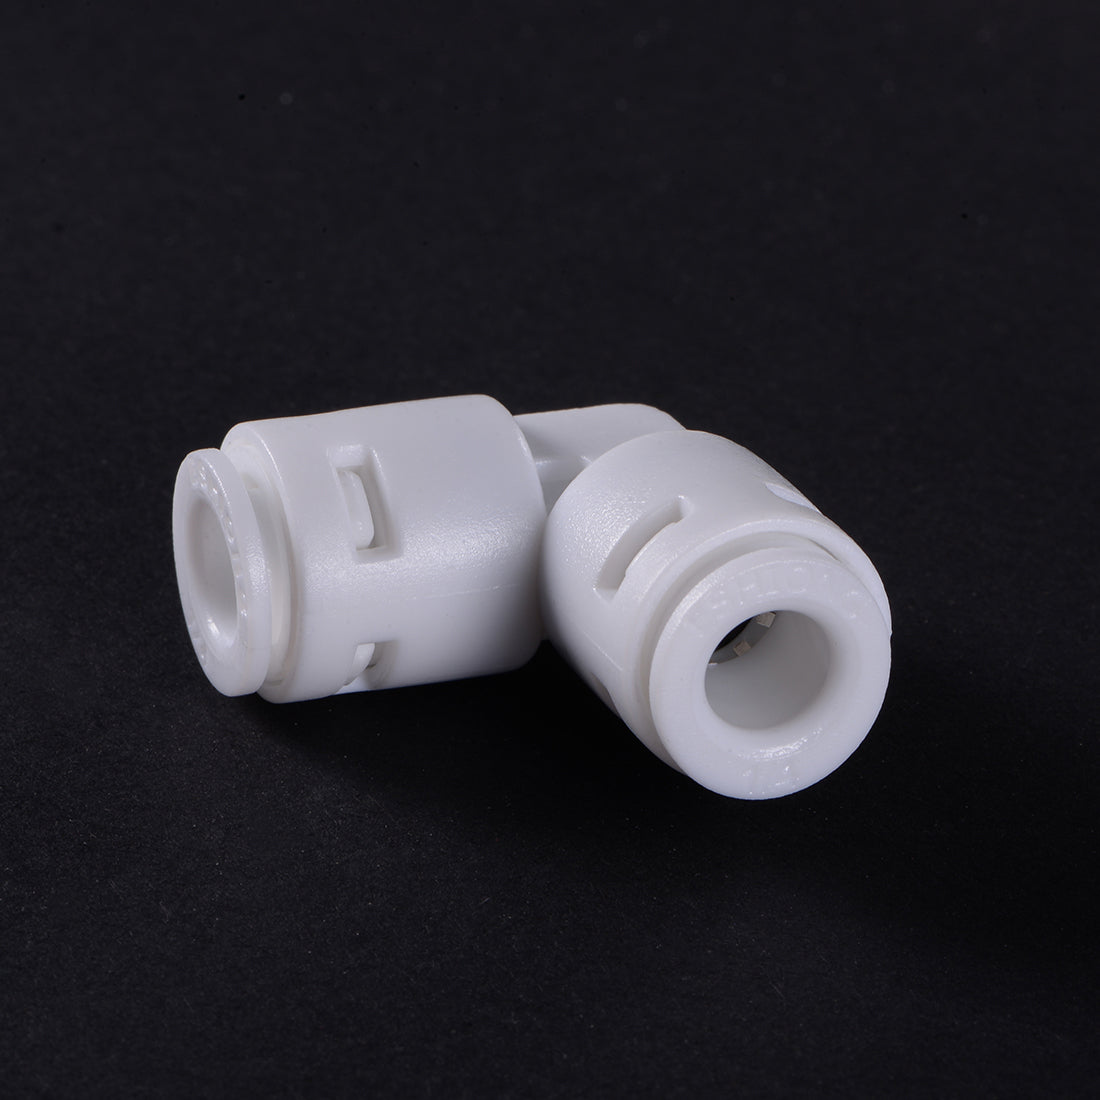 uxcell Uxcell Quick Connector Push in L Type PE Connect Fittings 1/4" to 1/4" Tube for Water Purifier RO System, 28x28mm White 15Pcs